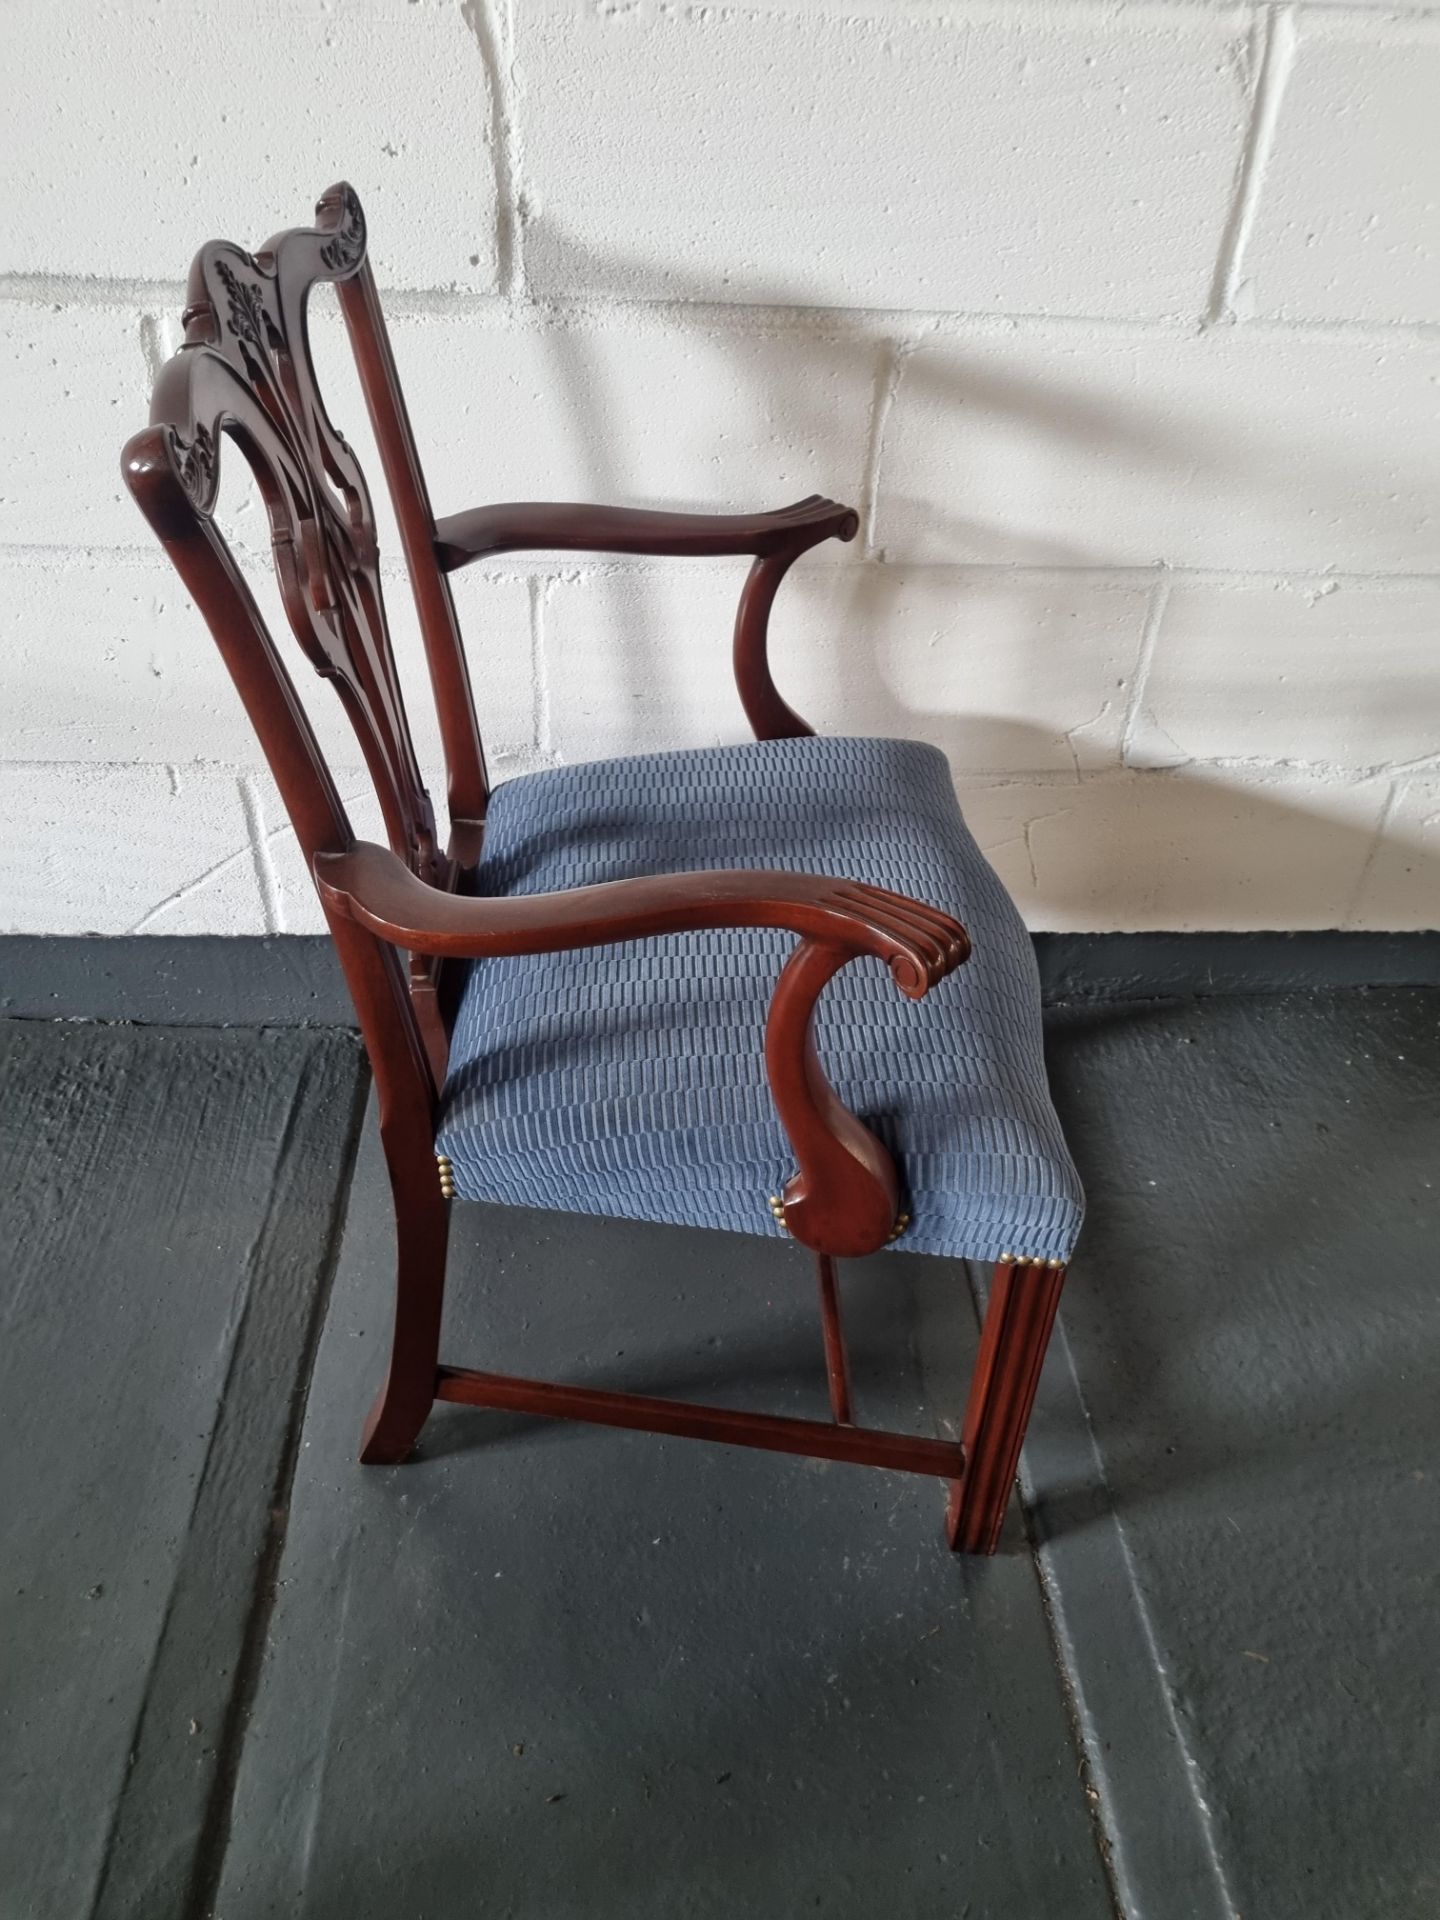 Arthur Brett Georgian-Style Dining Arm Chair With Bespoke Blue Upholstered Beautifully - Image 5 of 5